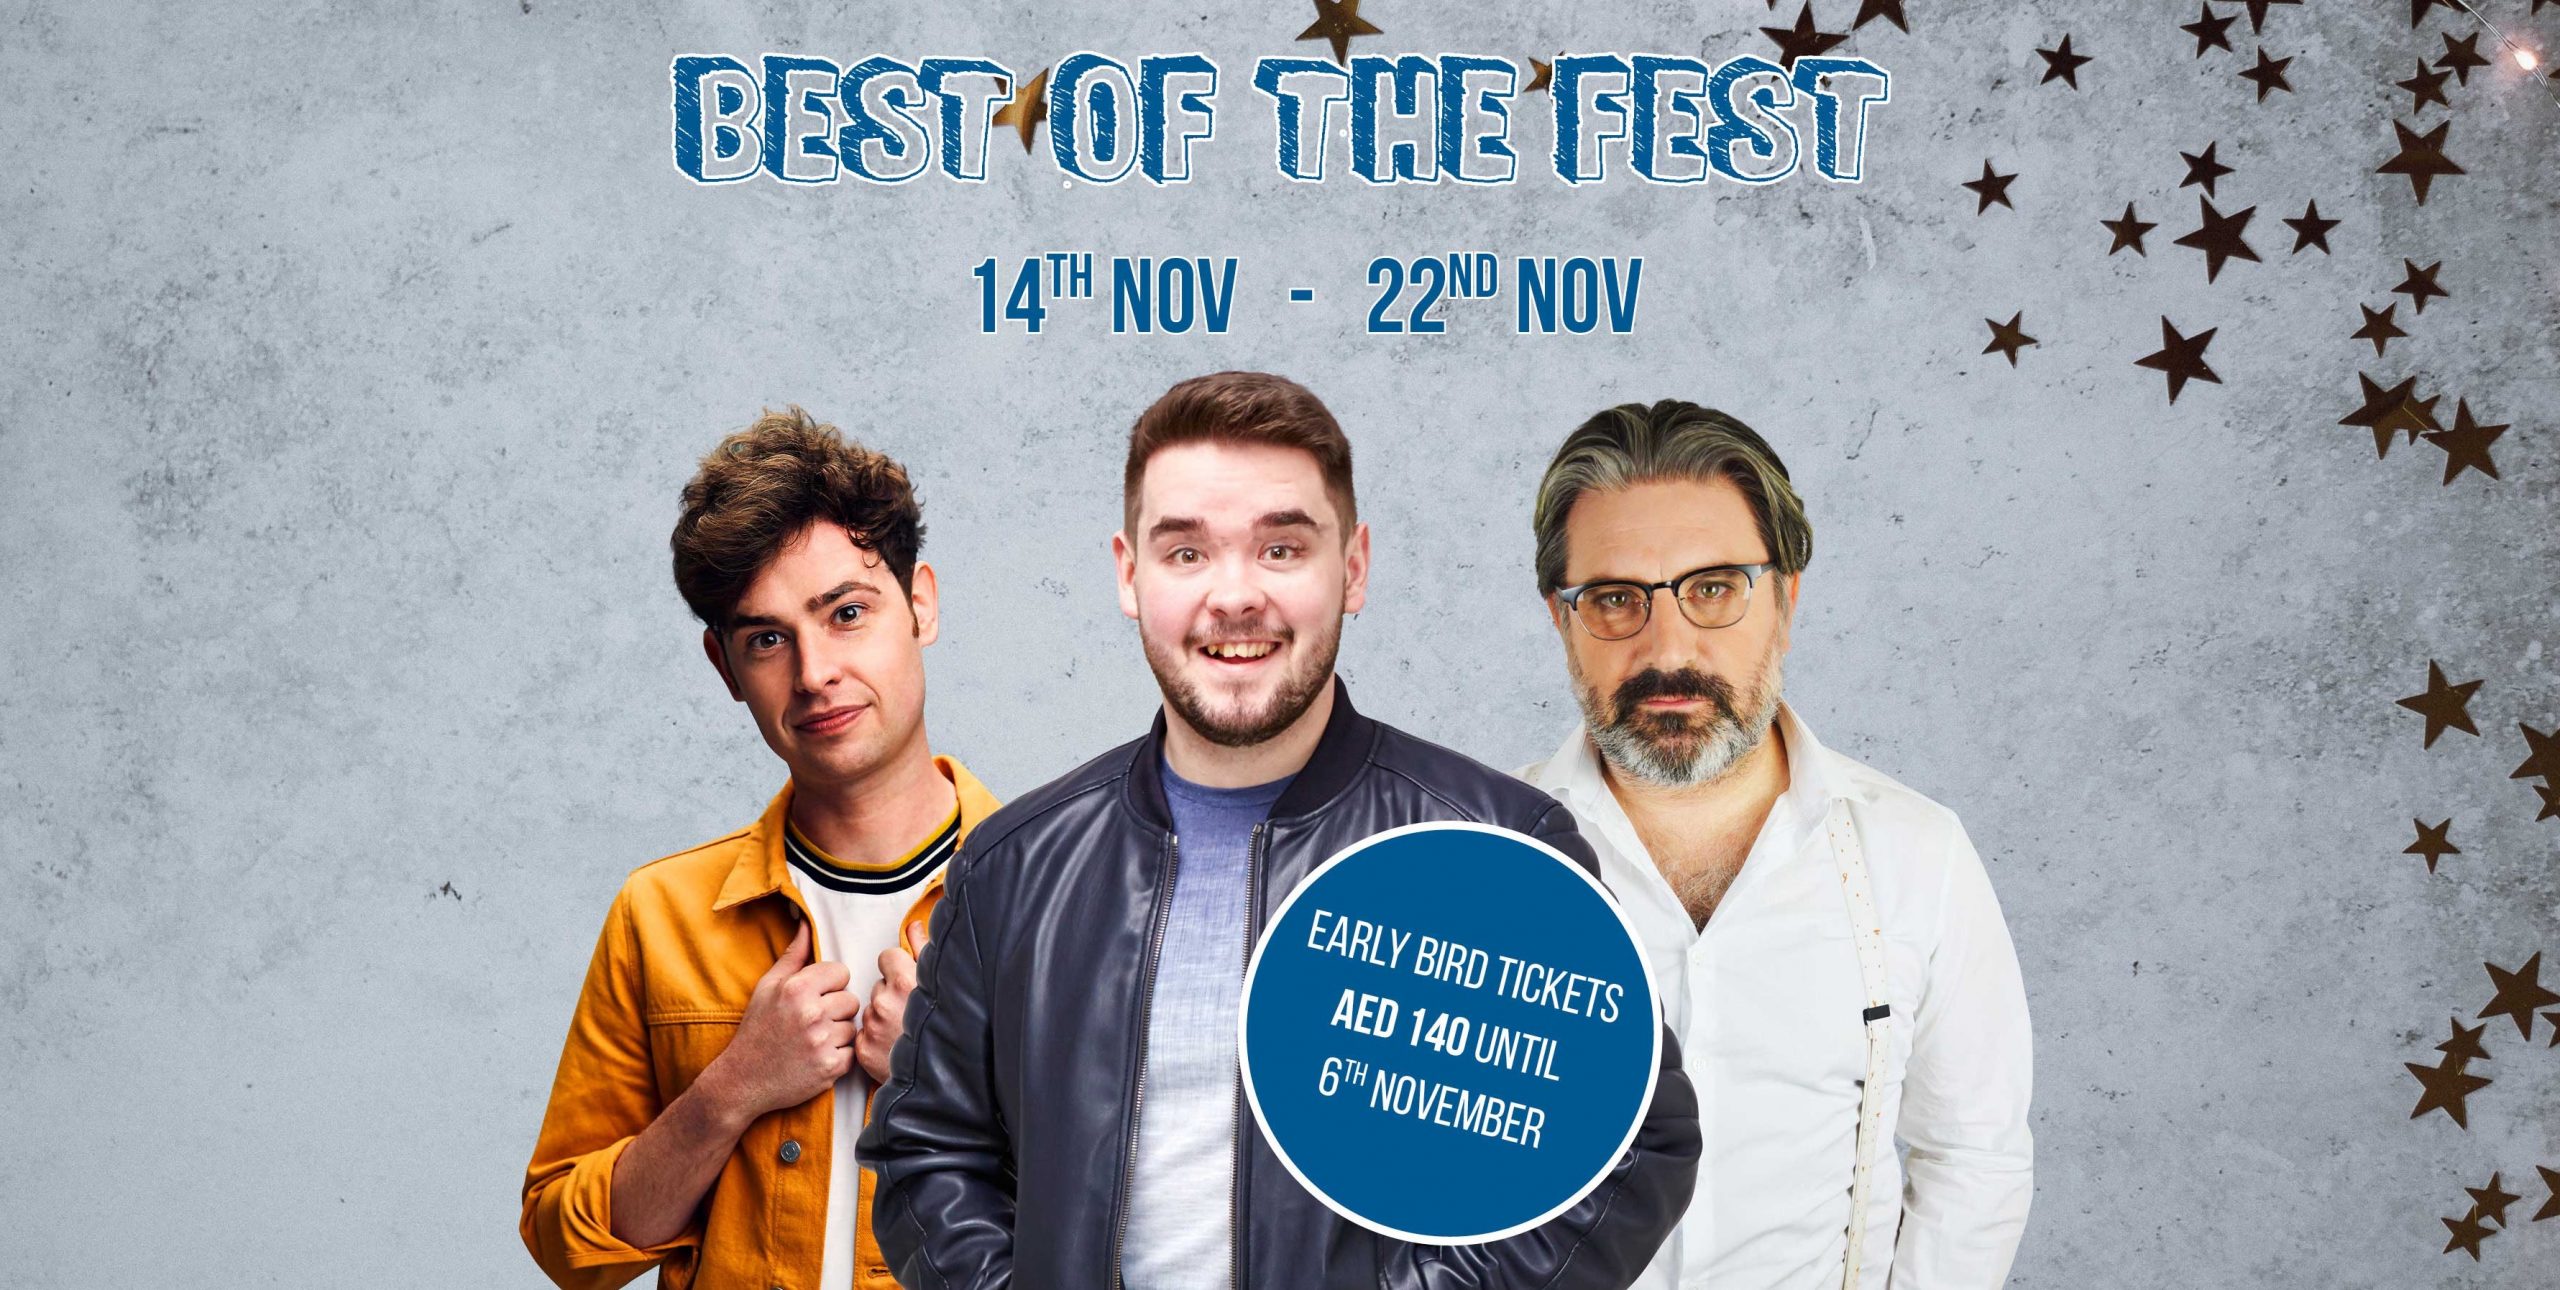 The Laughter Factory’s “Best of the Fest’ Tour” - Coming Soon in UAE